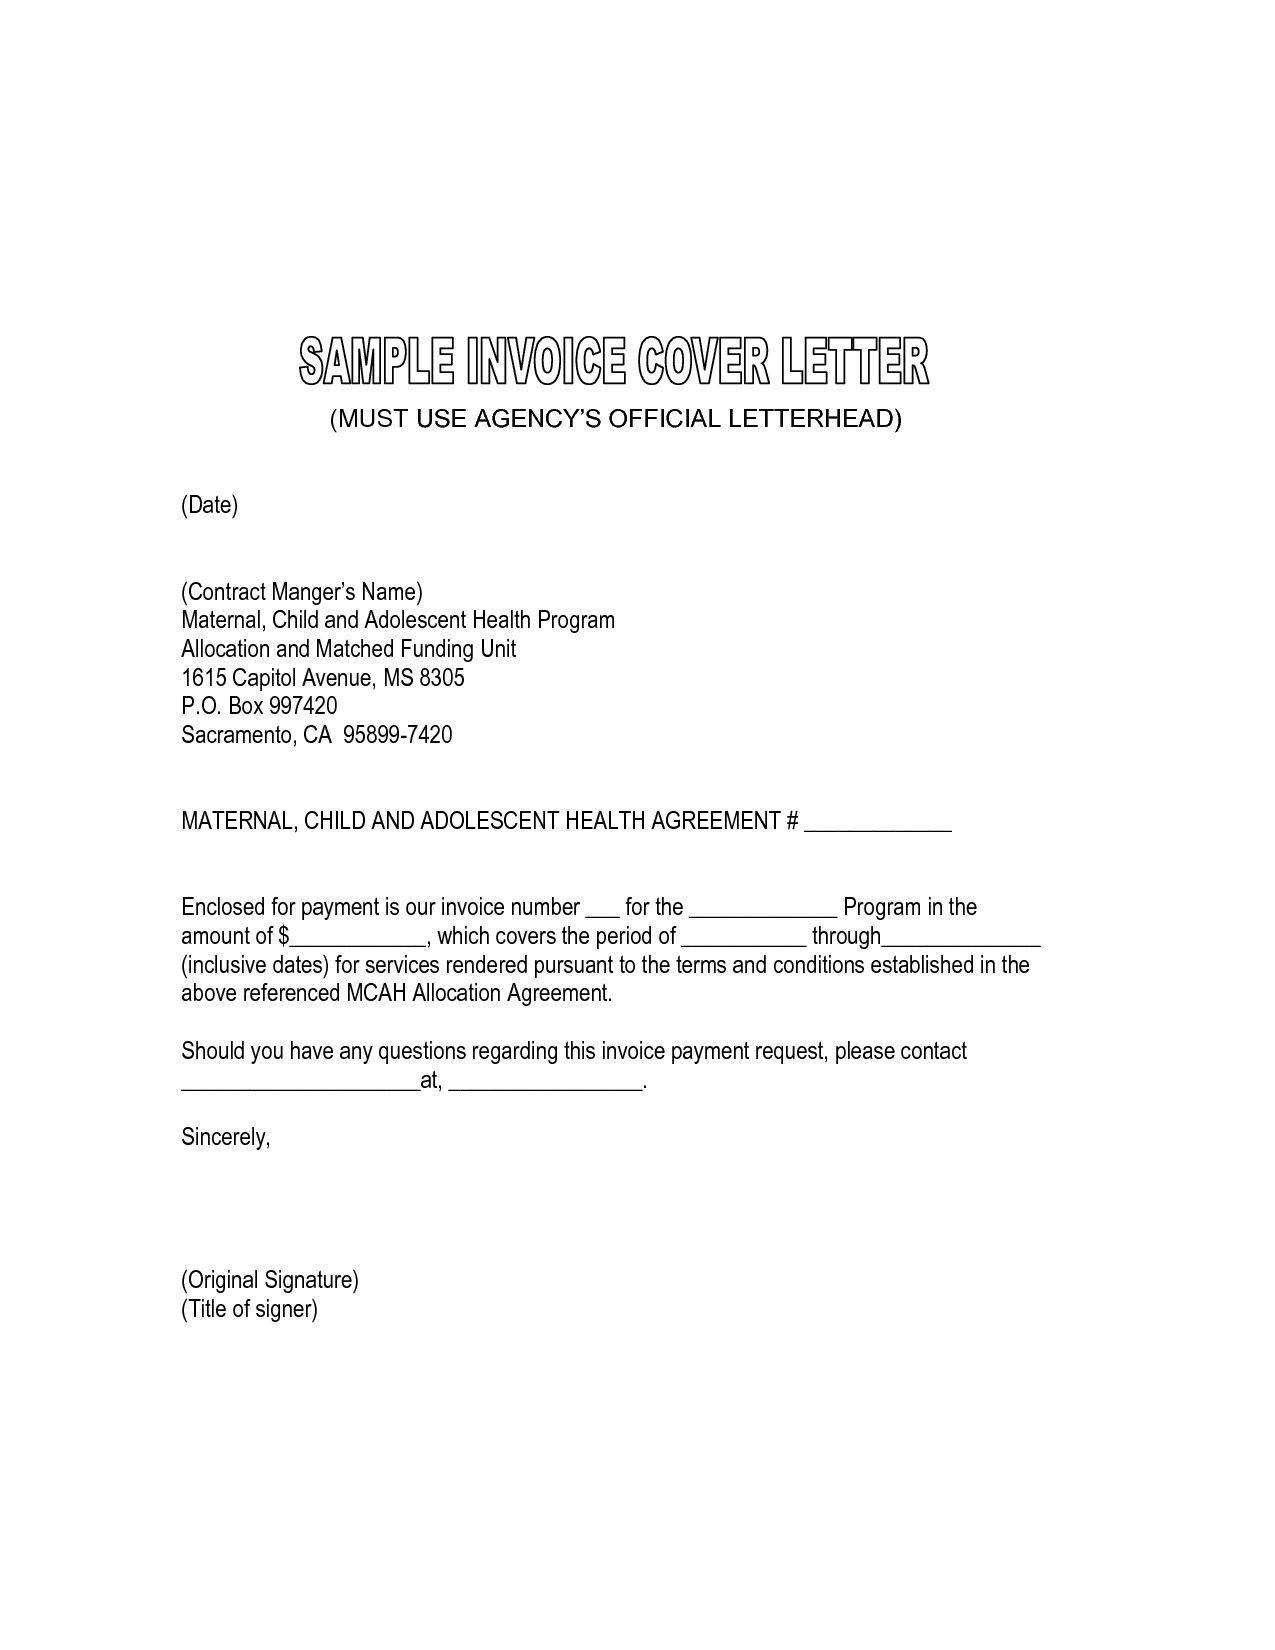 free sample invoice cover letter lettering invoice sample of letters after invoicing